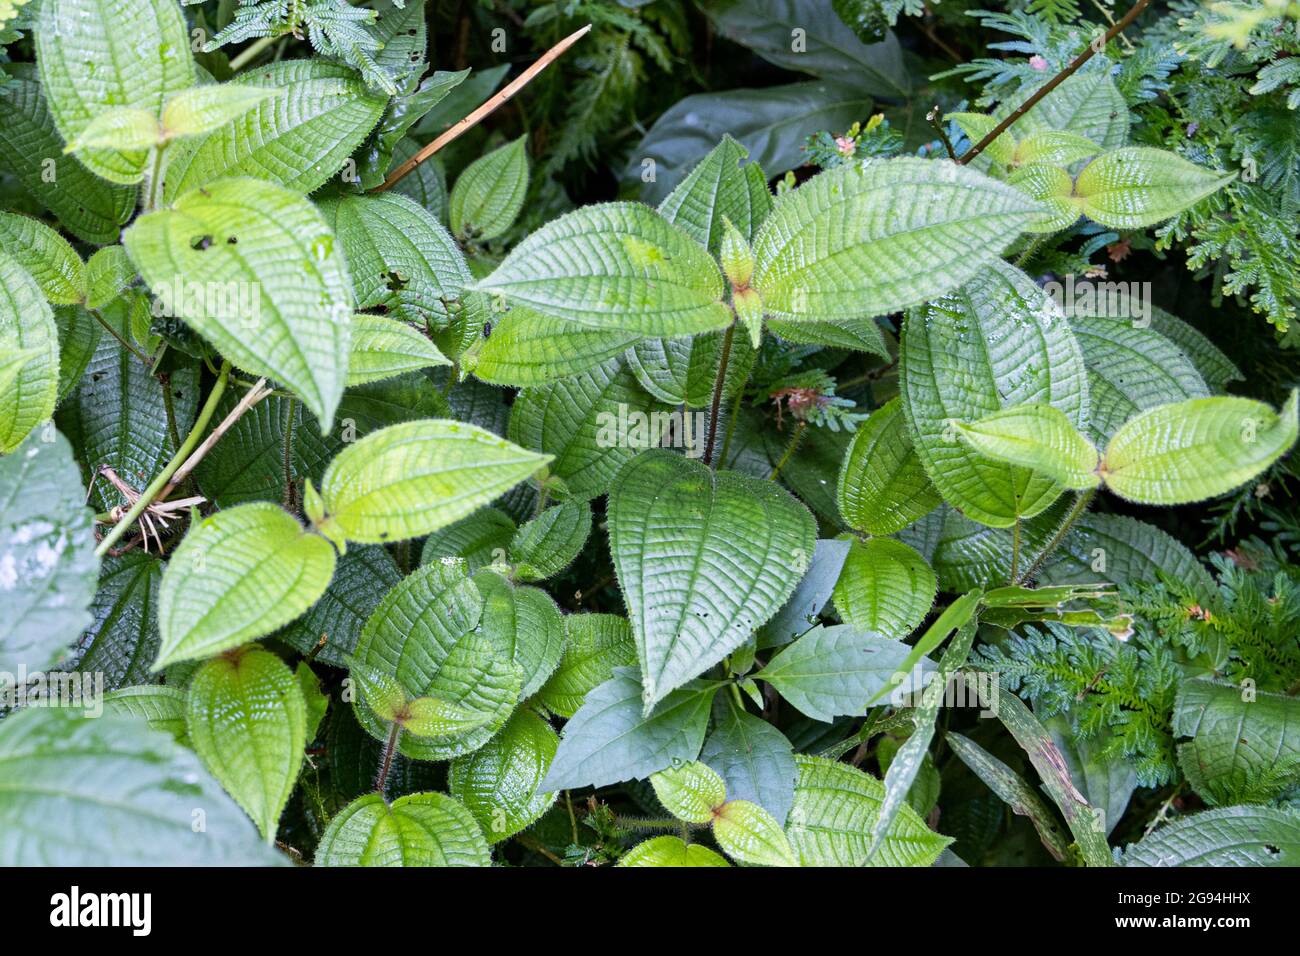 Clidemia hirta or senduduk buluh is plant found in tropical rainforest and have medicinal value Stock Photo